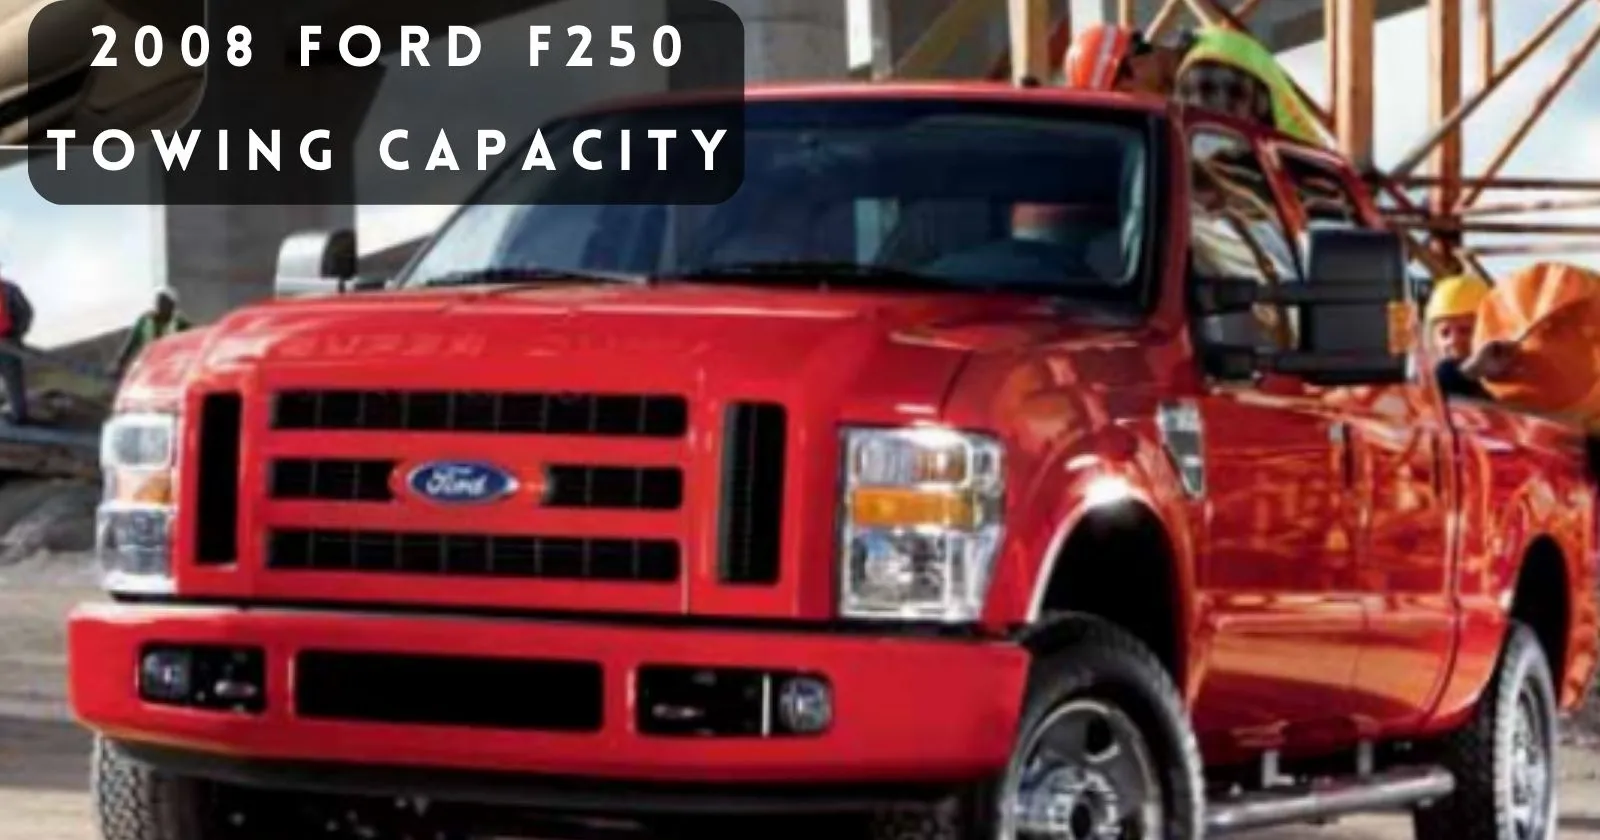 explore-2008-ford-f250-towing-capacity-with-chart-thecartowing